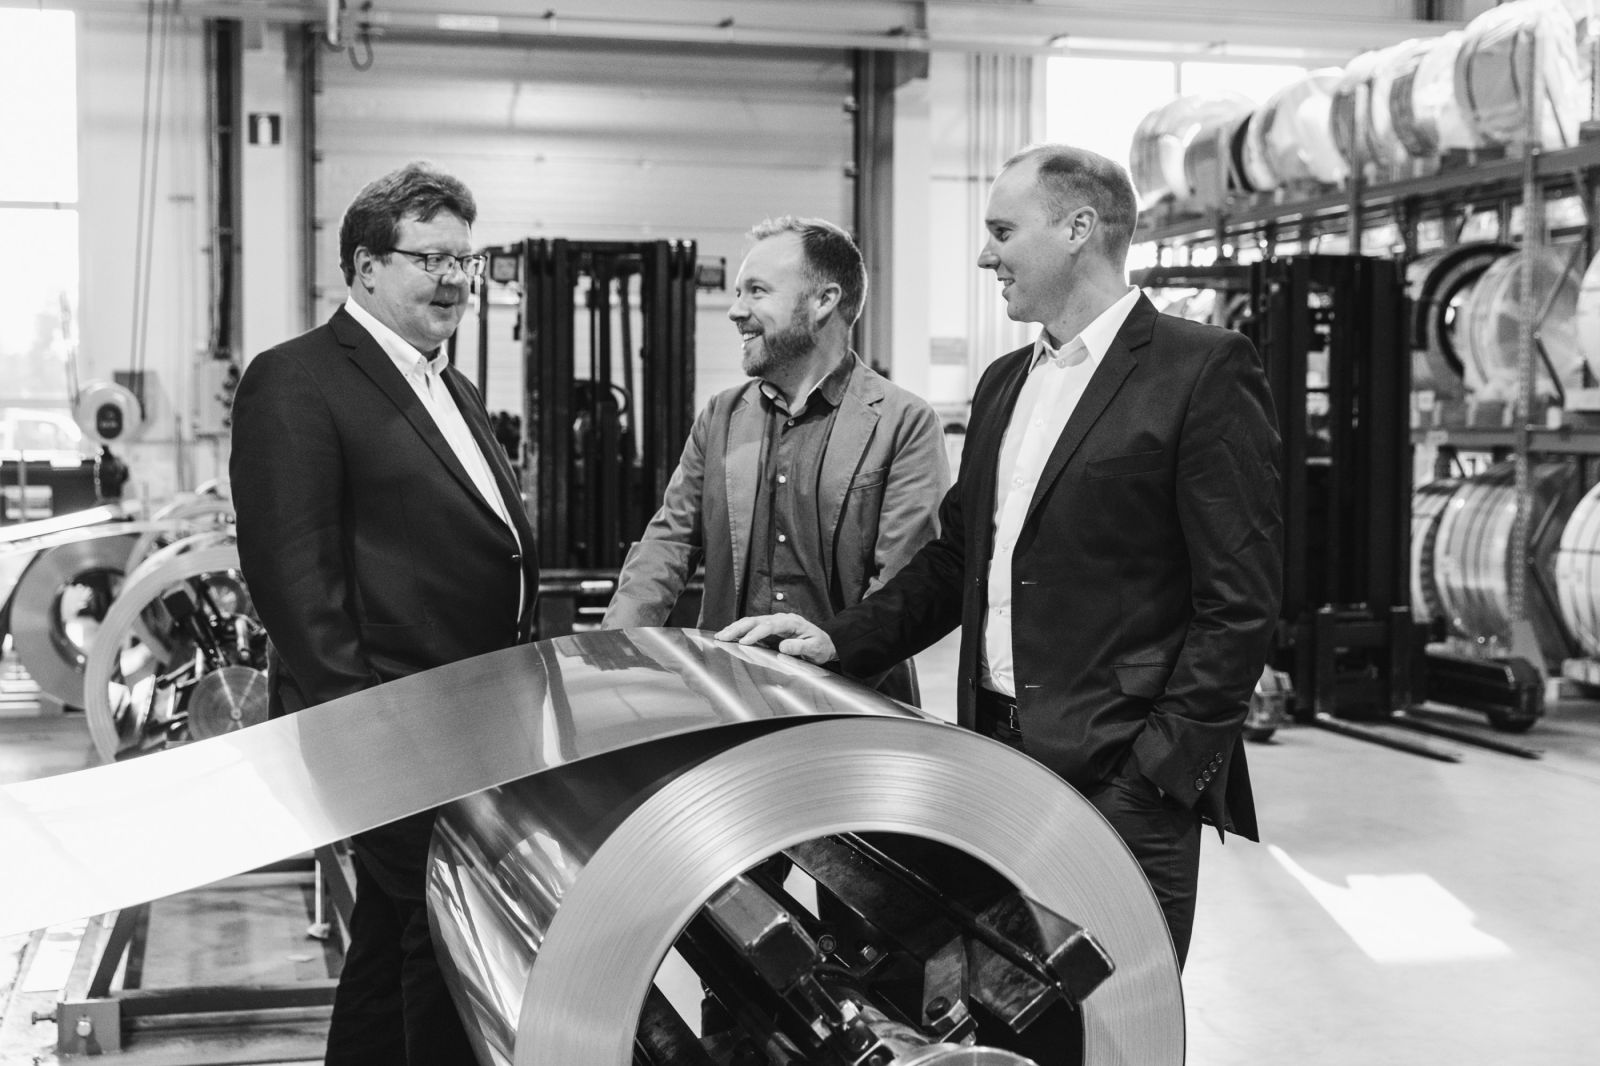 Refrigeration Business Director Heikki Oksanen (left), Energy Business Director Tobias Häggblom and Chemical and Process Business Director Marko Rantala photographed at Vahterus production facilities in Kalanti, Finland.